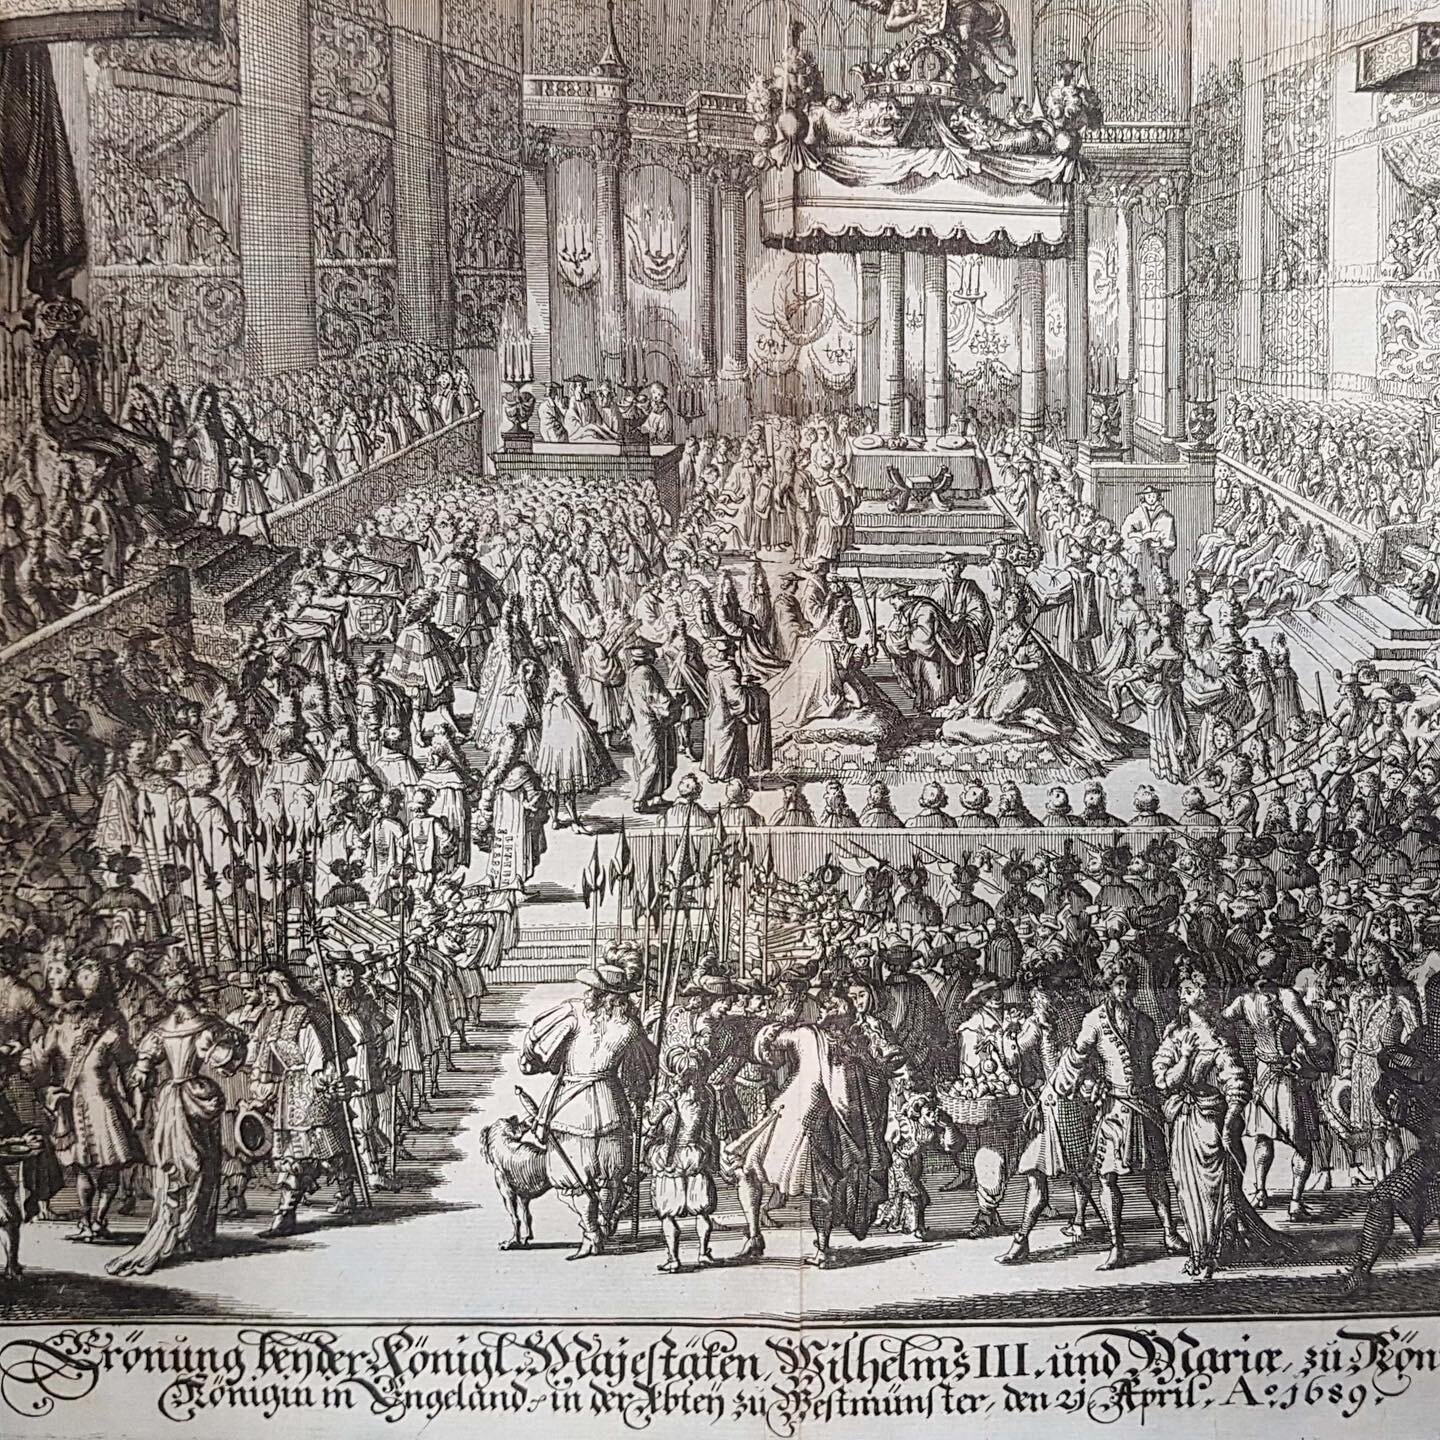 From the Society&rsquo;s archives: the Coronation of King William III and Queen Mary II at Westminster, 11 April 1689.
William and Mary had come to the throne as a result of the overthrow of King James II in what was known as the Glorious Revolution 